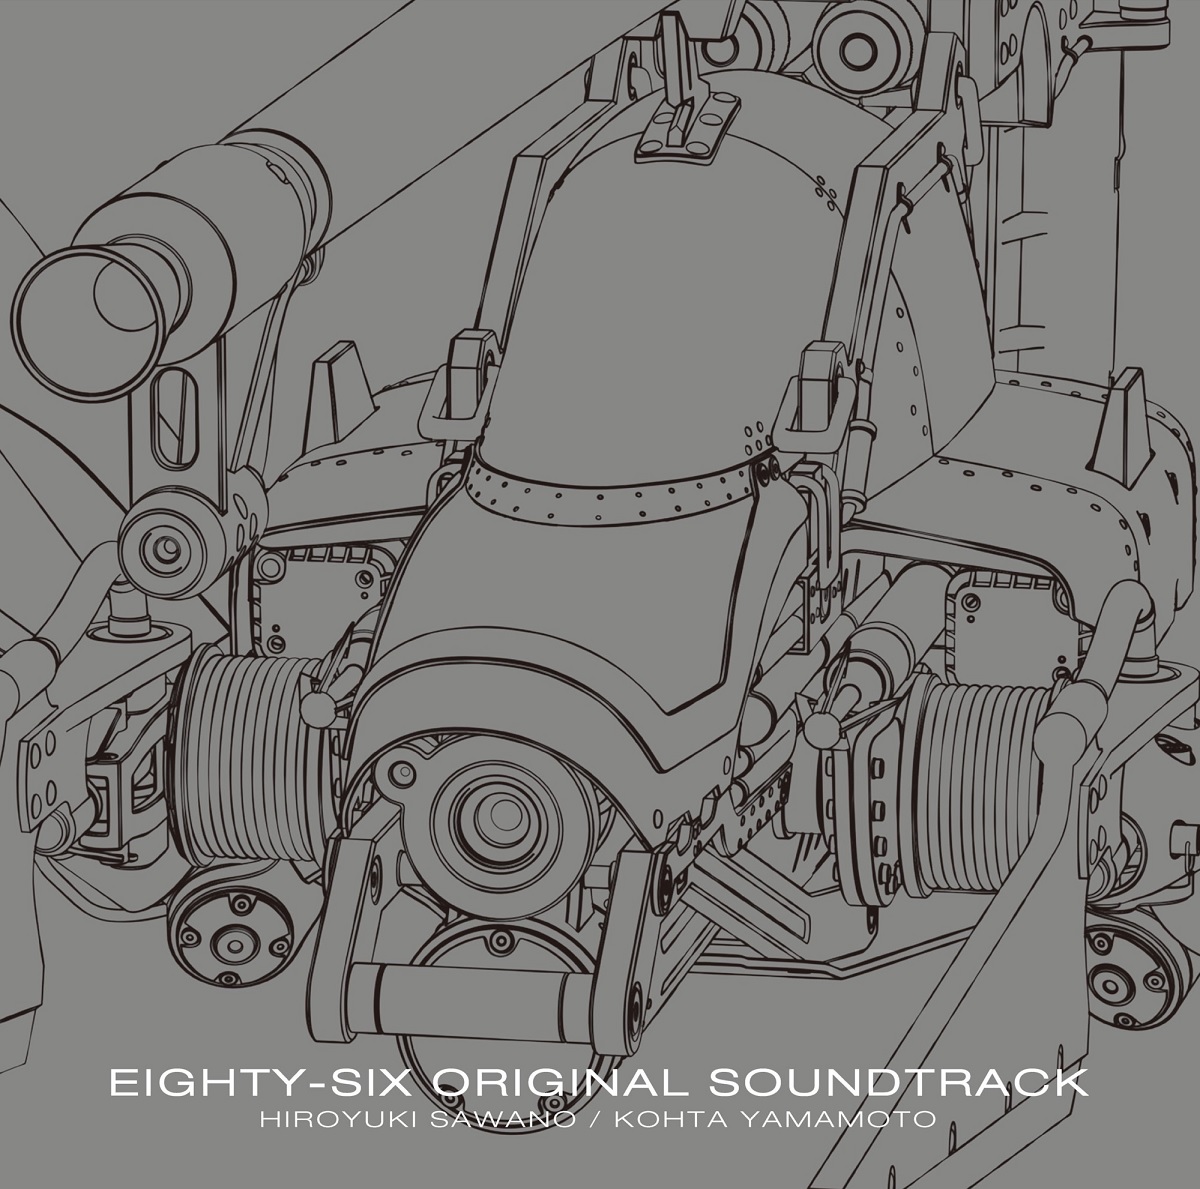 Cover for『Hiroyuki Sawano feat. Laco - THE ANSWER』from the release『EIGHTY-SIX ORIGINAL SOUNDTRACK』